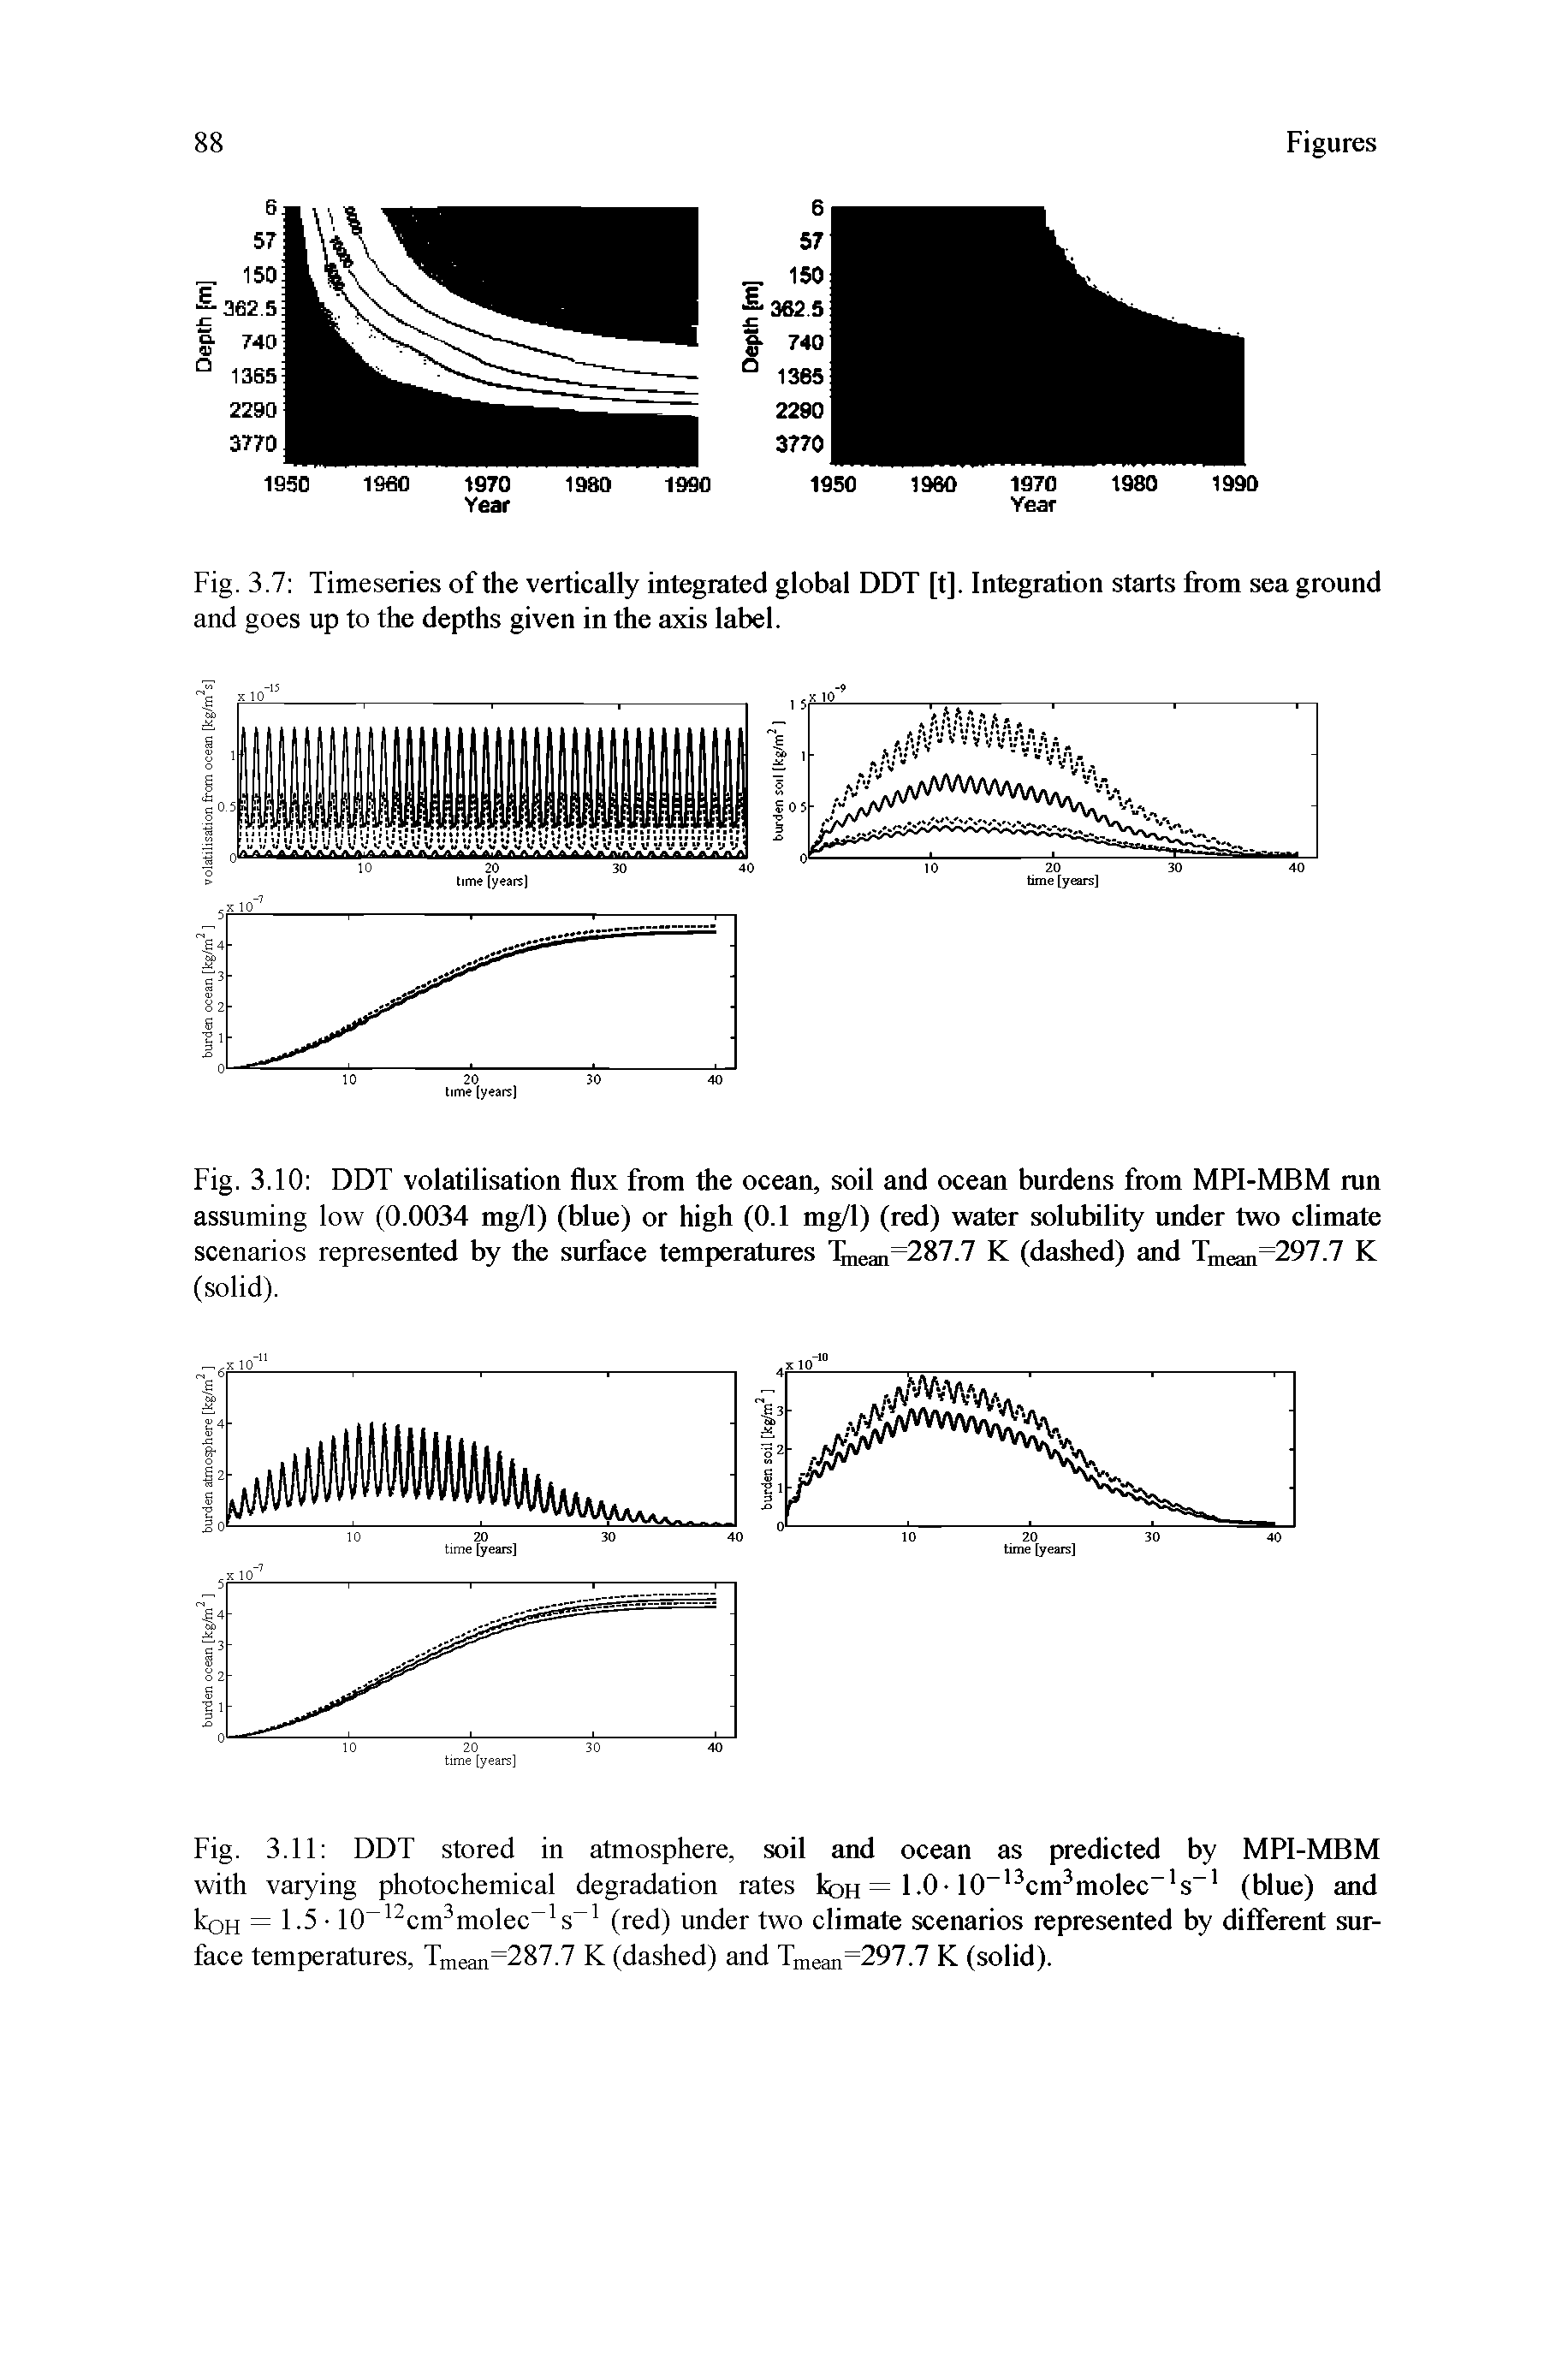 Fig. 3.7 Timeseries of the vertically integrated global DDT [t]. Integration starts from sea ground and goes up to the depths given in the axis label.